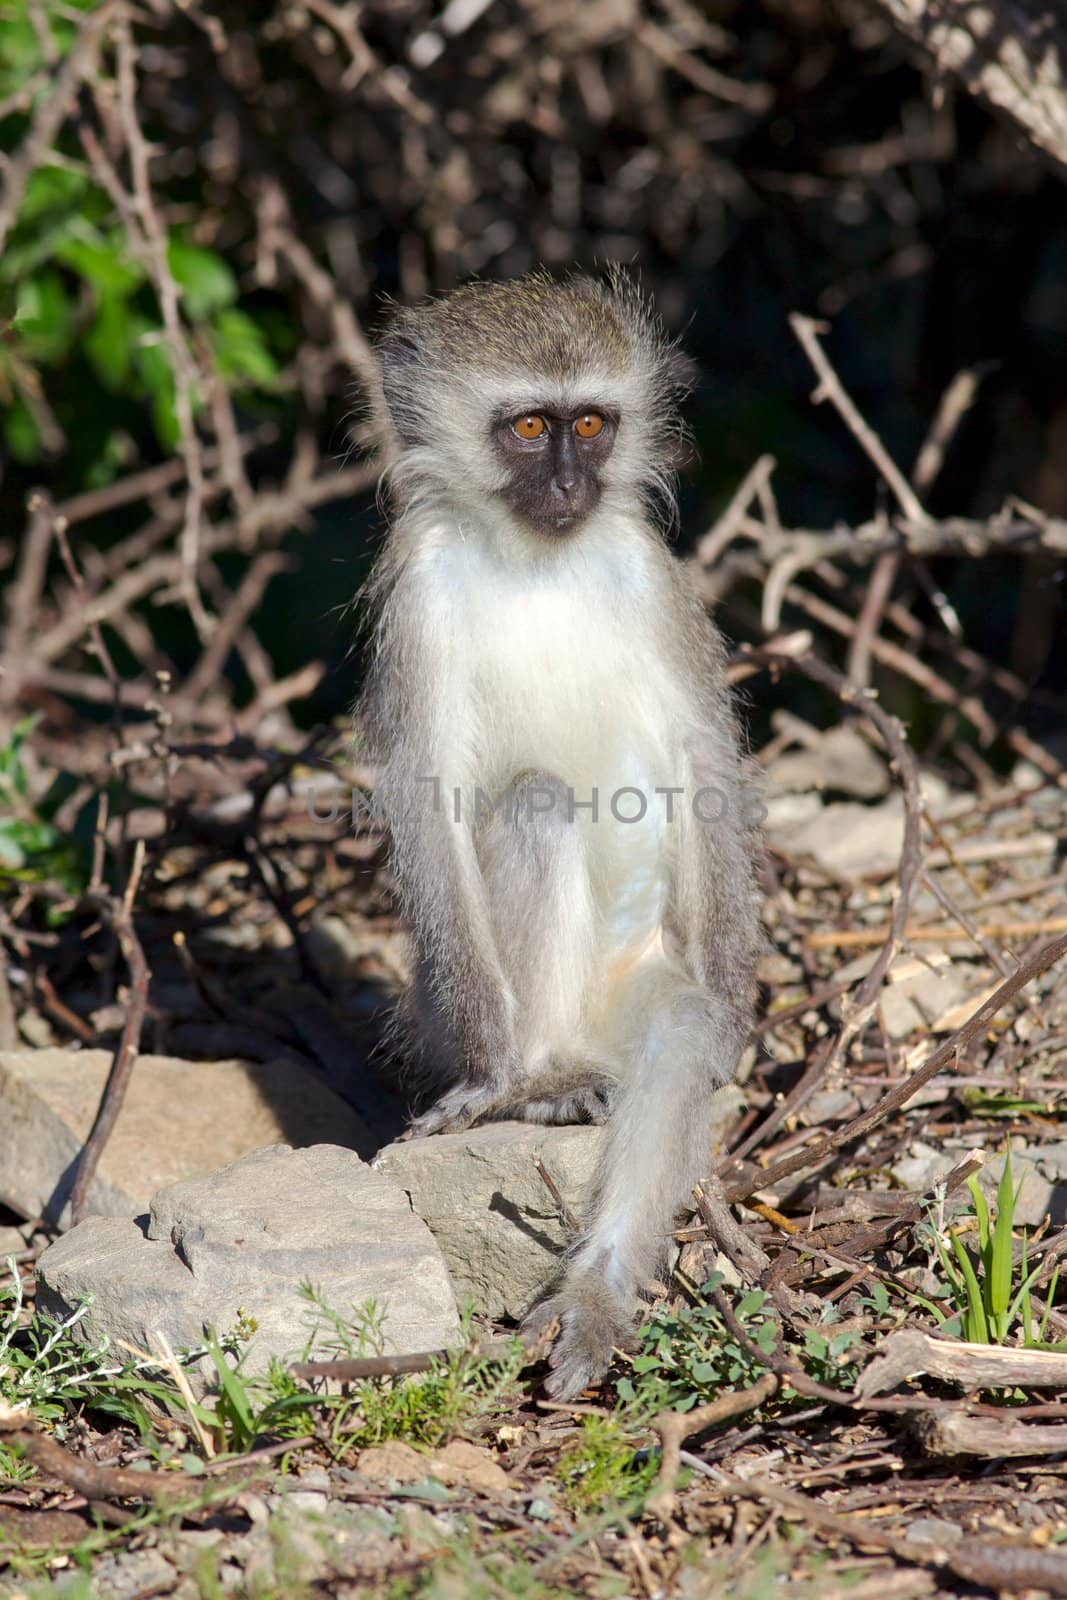 A young vervet (green) monkey (Cercopithecus aethiops) in Mountain Zebra National Park, South Africa.